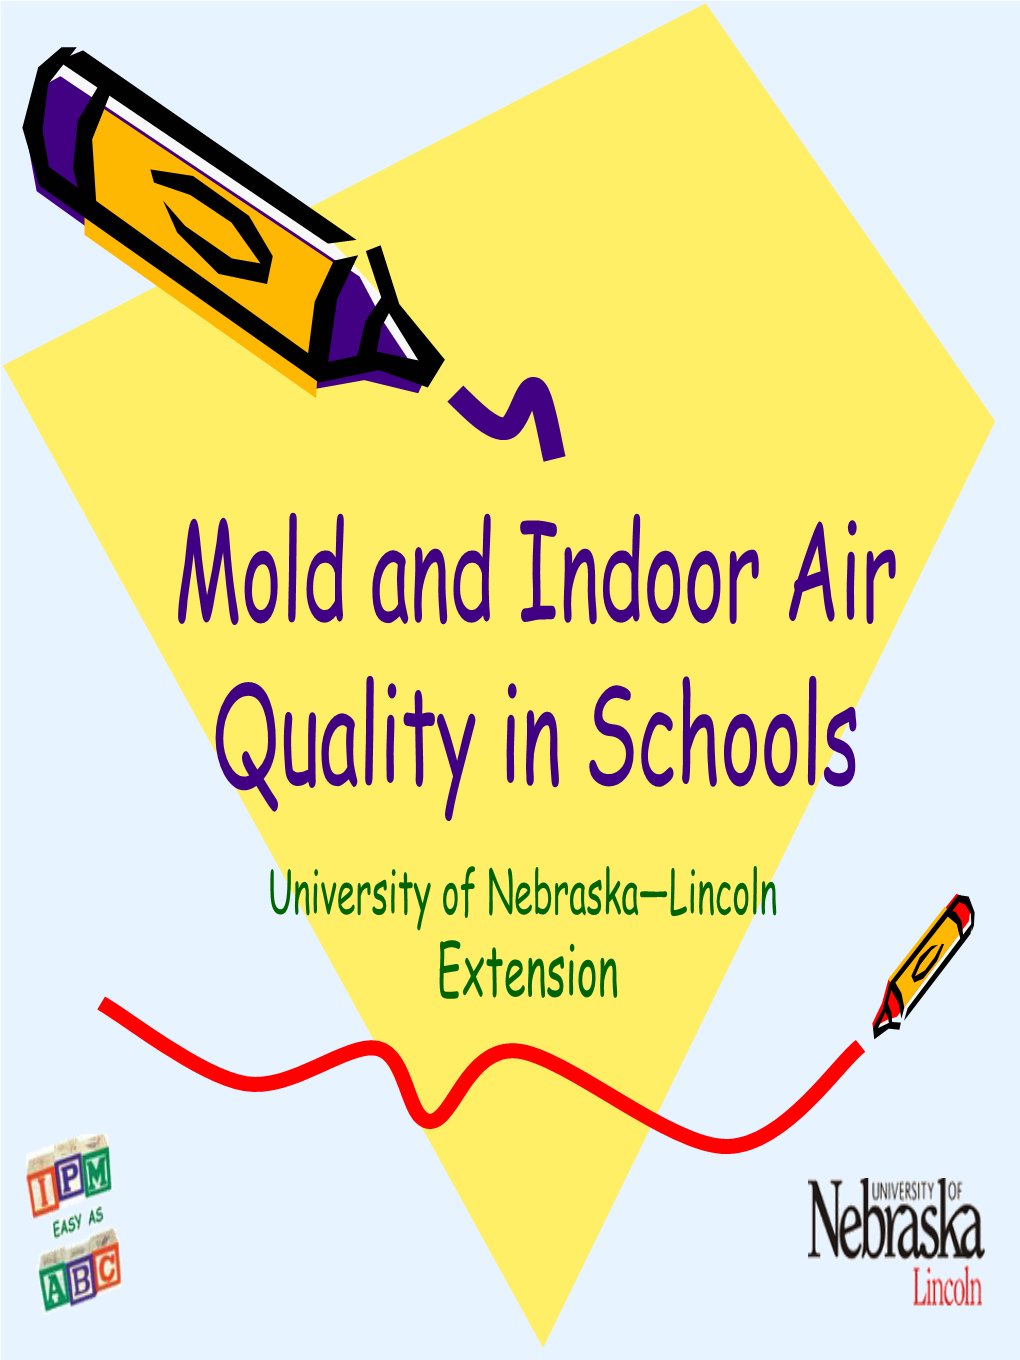 Mold and Indoor Air Quality in Schools